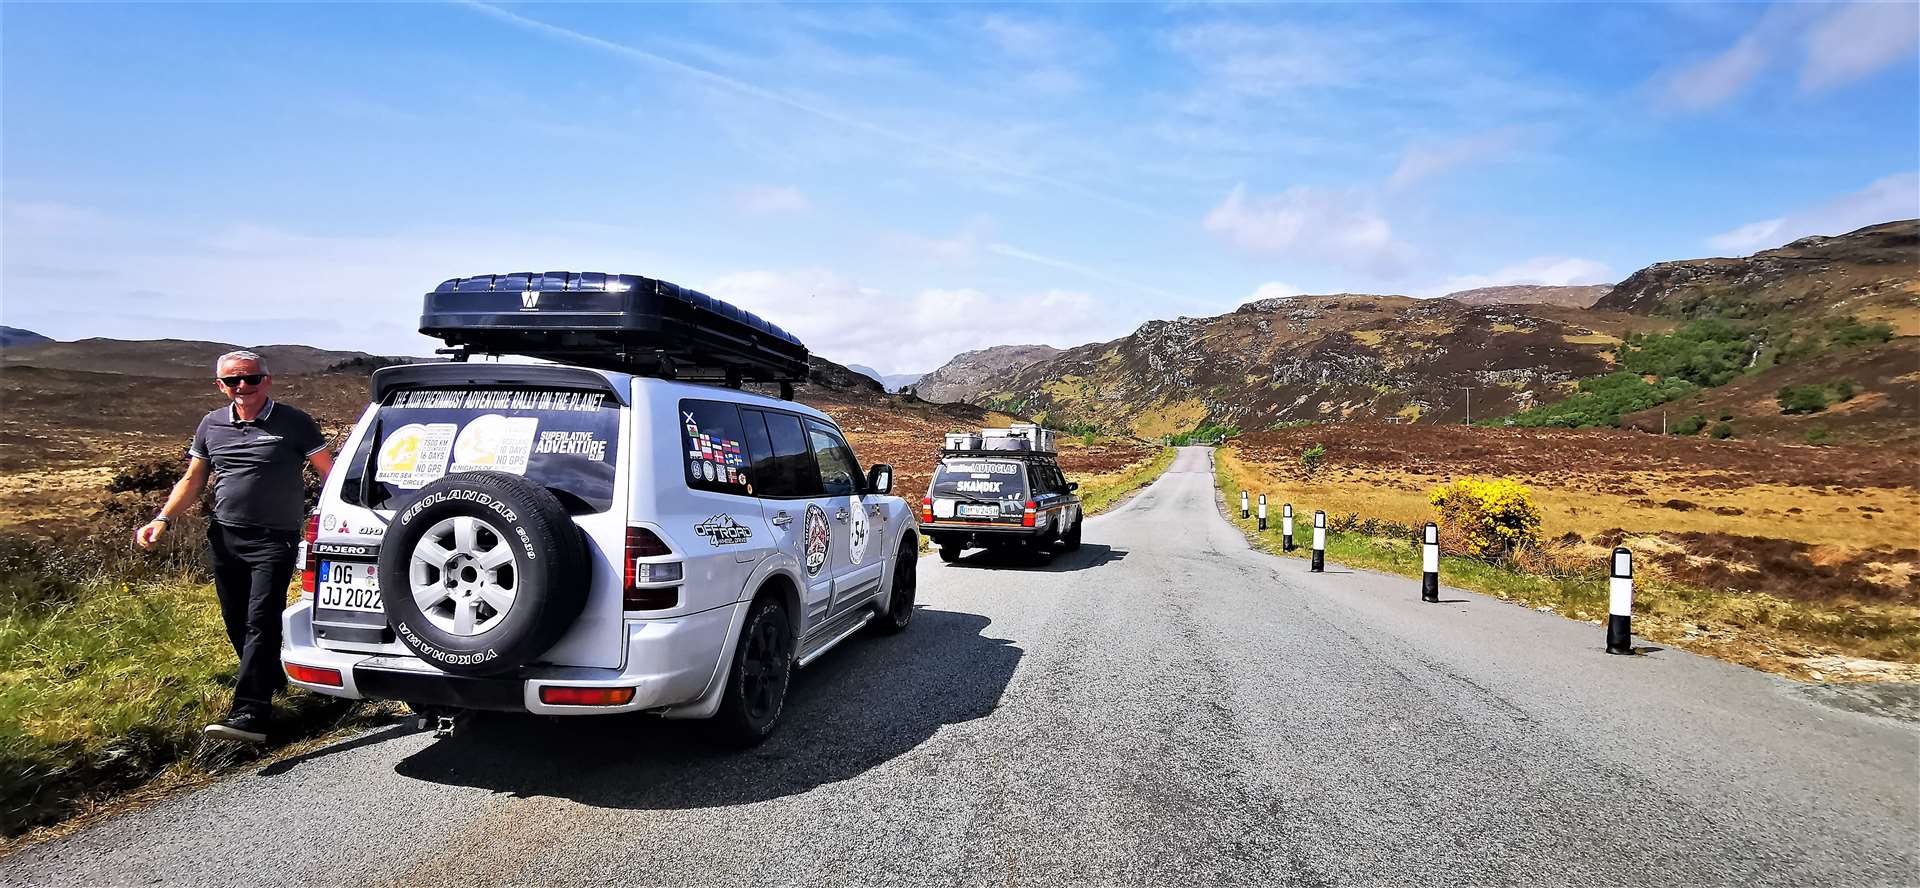 There are 75 rally teams involved in the adventure from all over Europe.